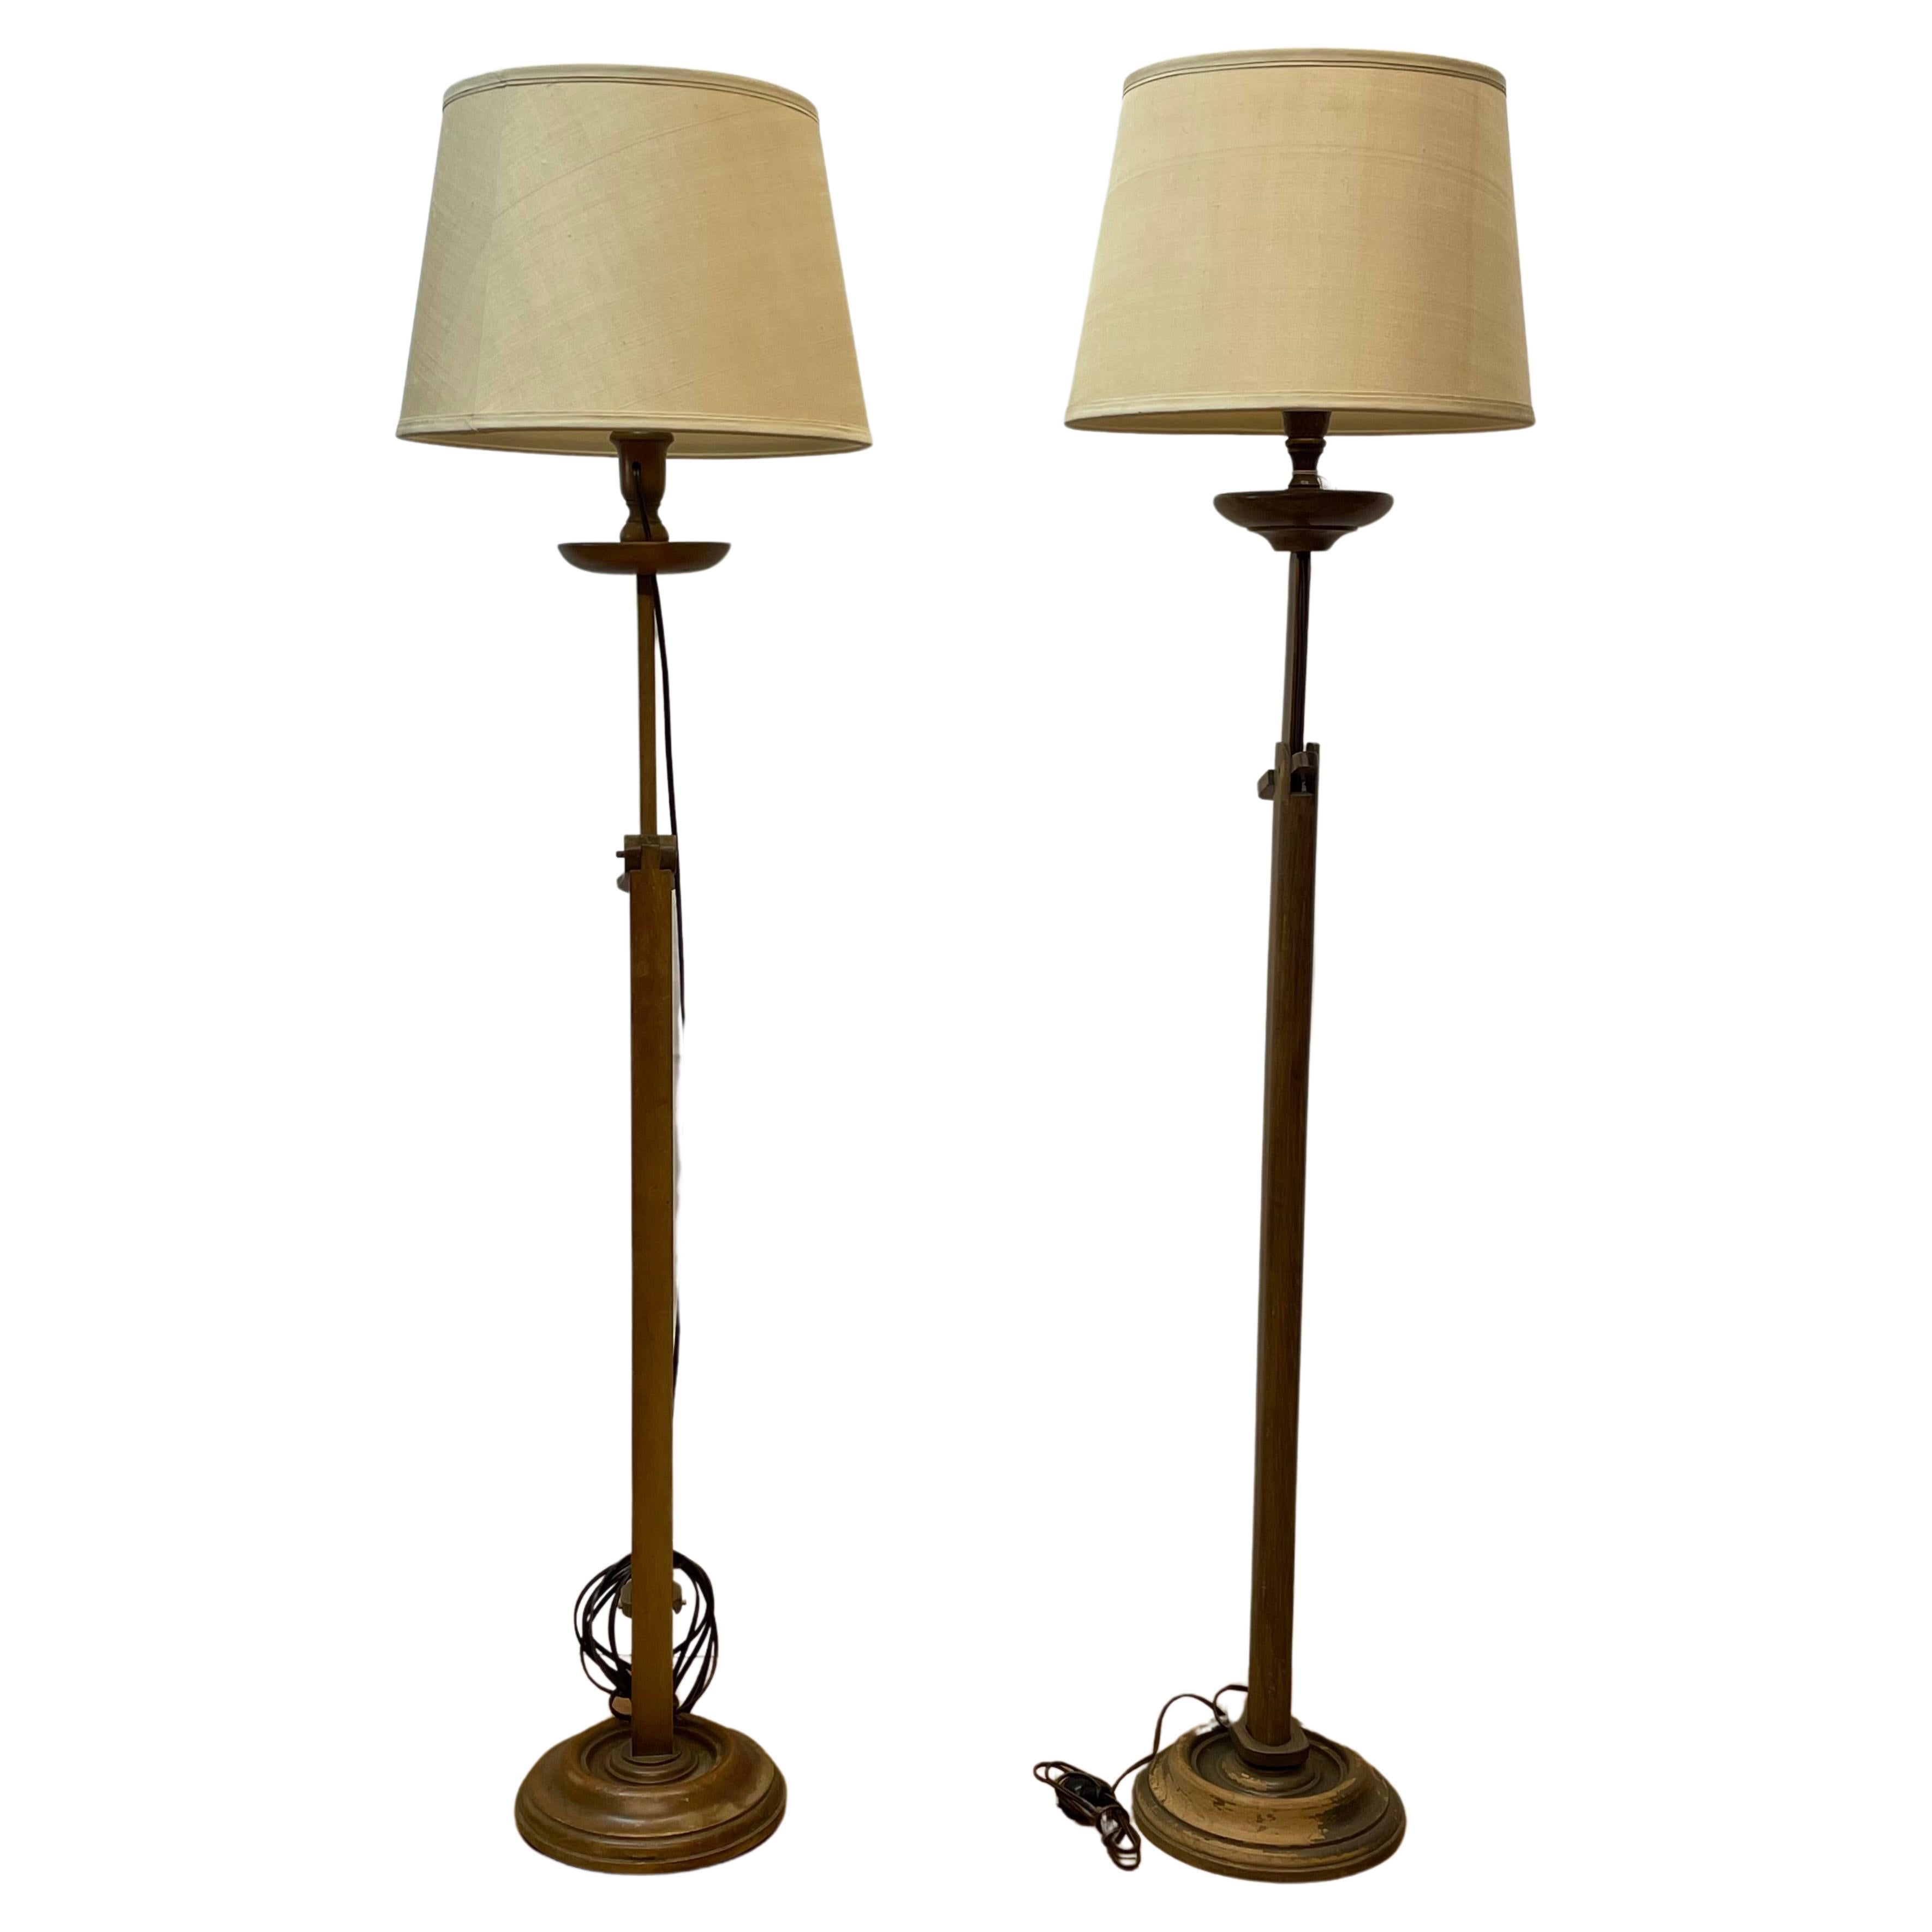 Pair of ratchet adjustable hand carved wood floor lamps with glass shades